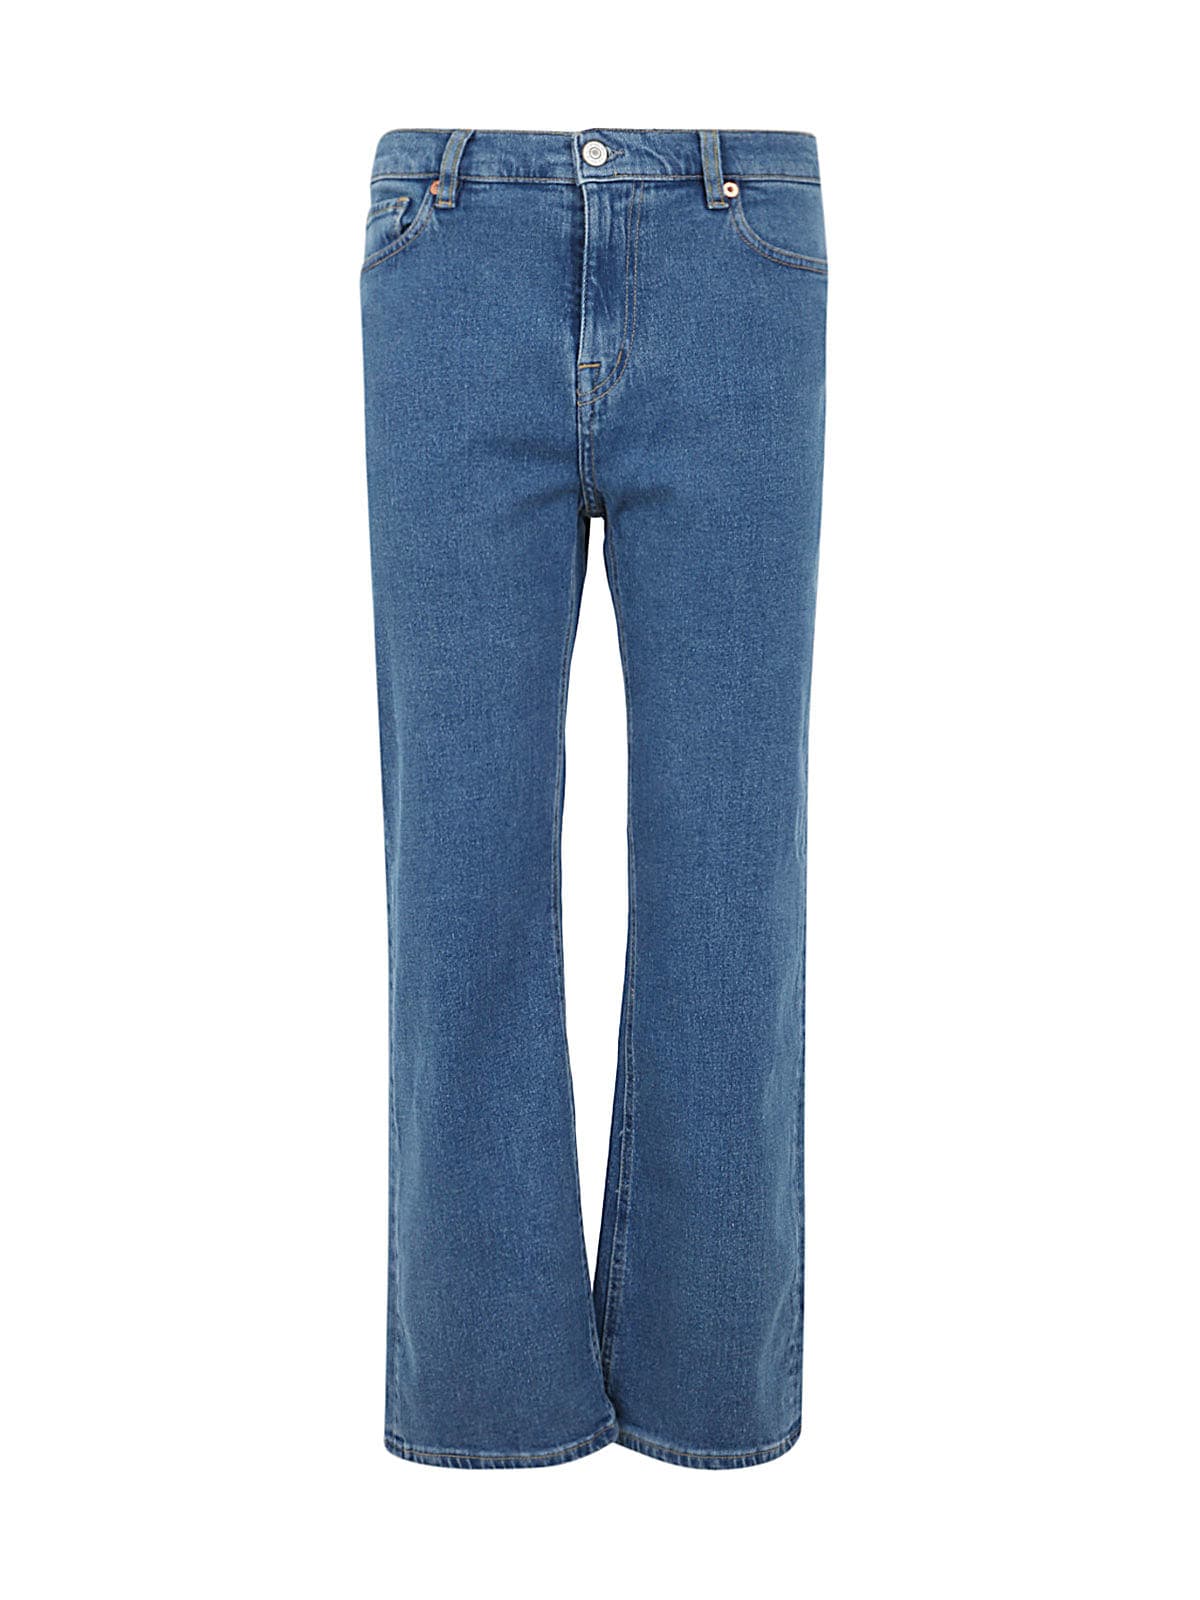 PS BY PAUL SMITH FLAIRED JEANS